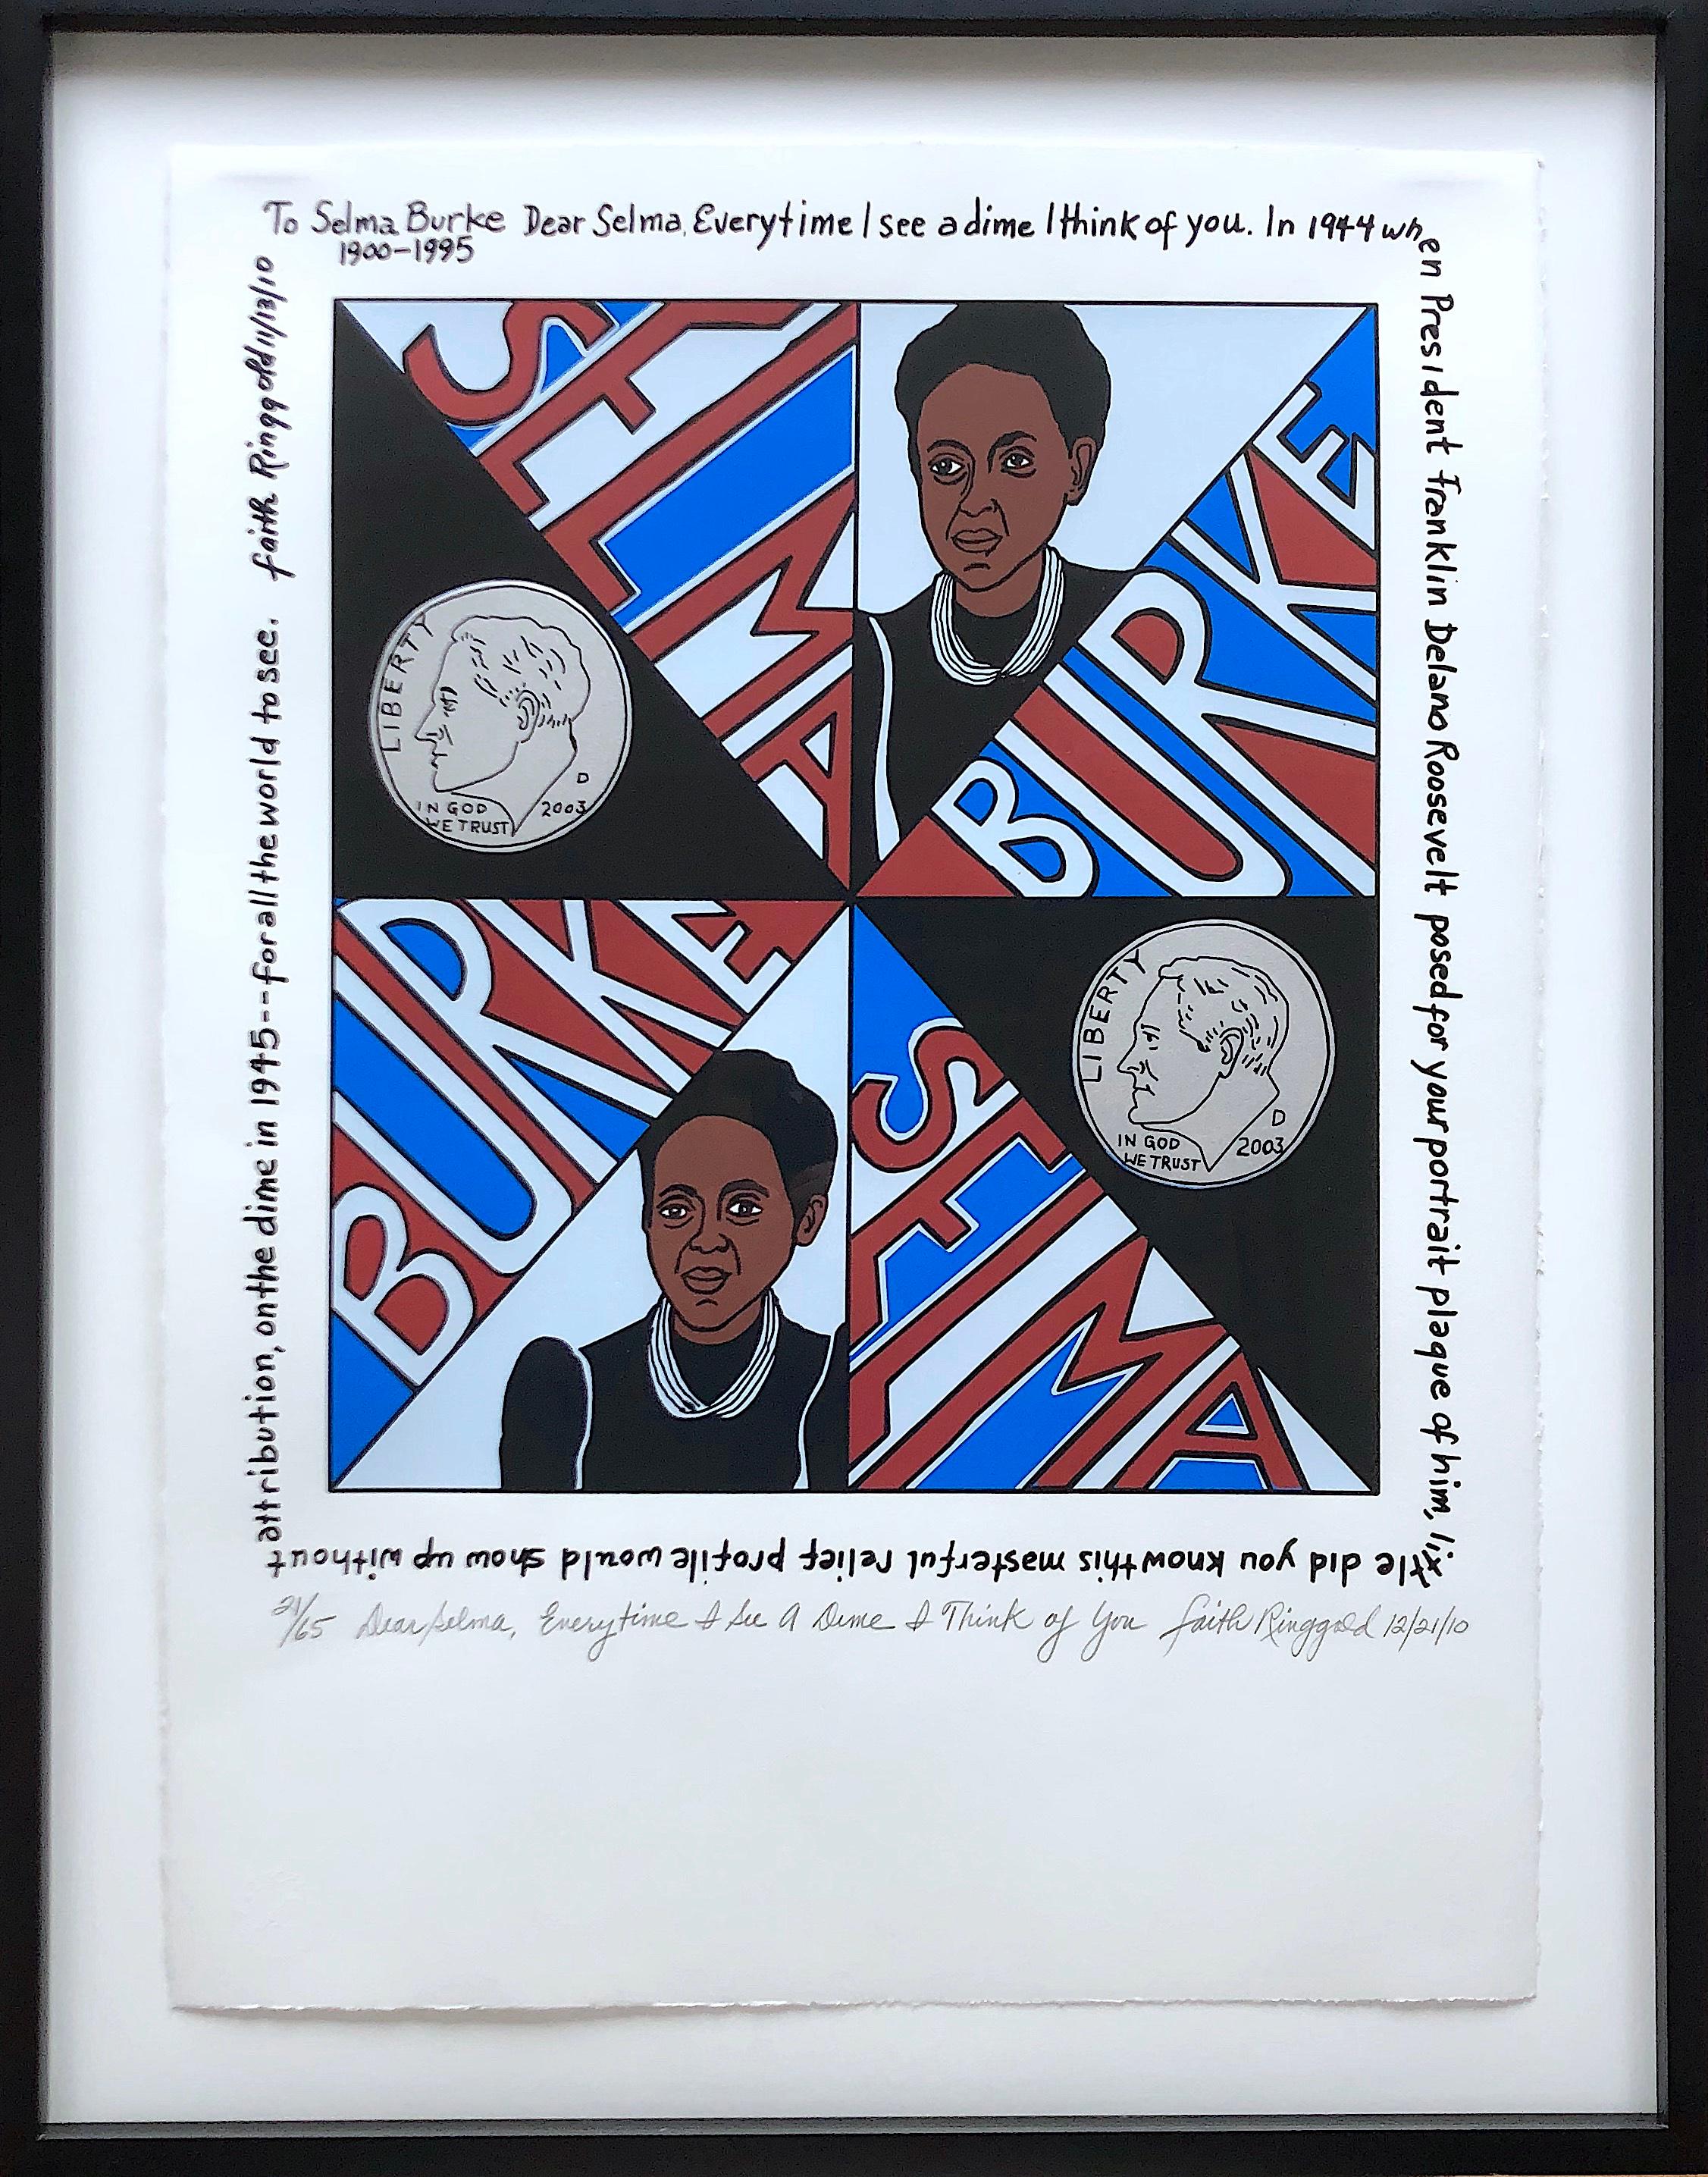 Dear Selma, Every Time I See a Dime, I Think of You - framed print w/ red & blue - Print by Faith Ringgold